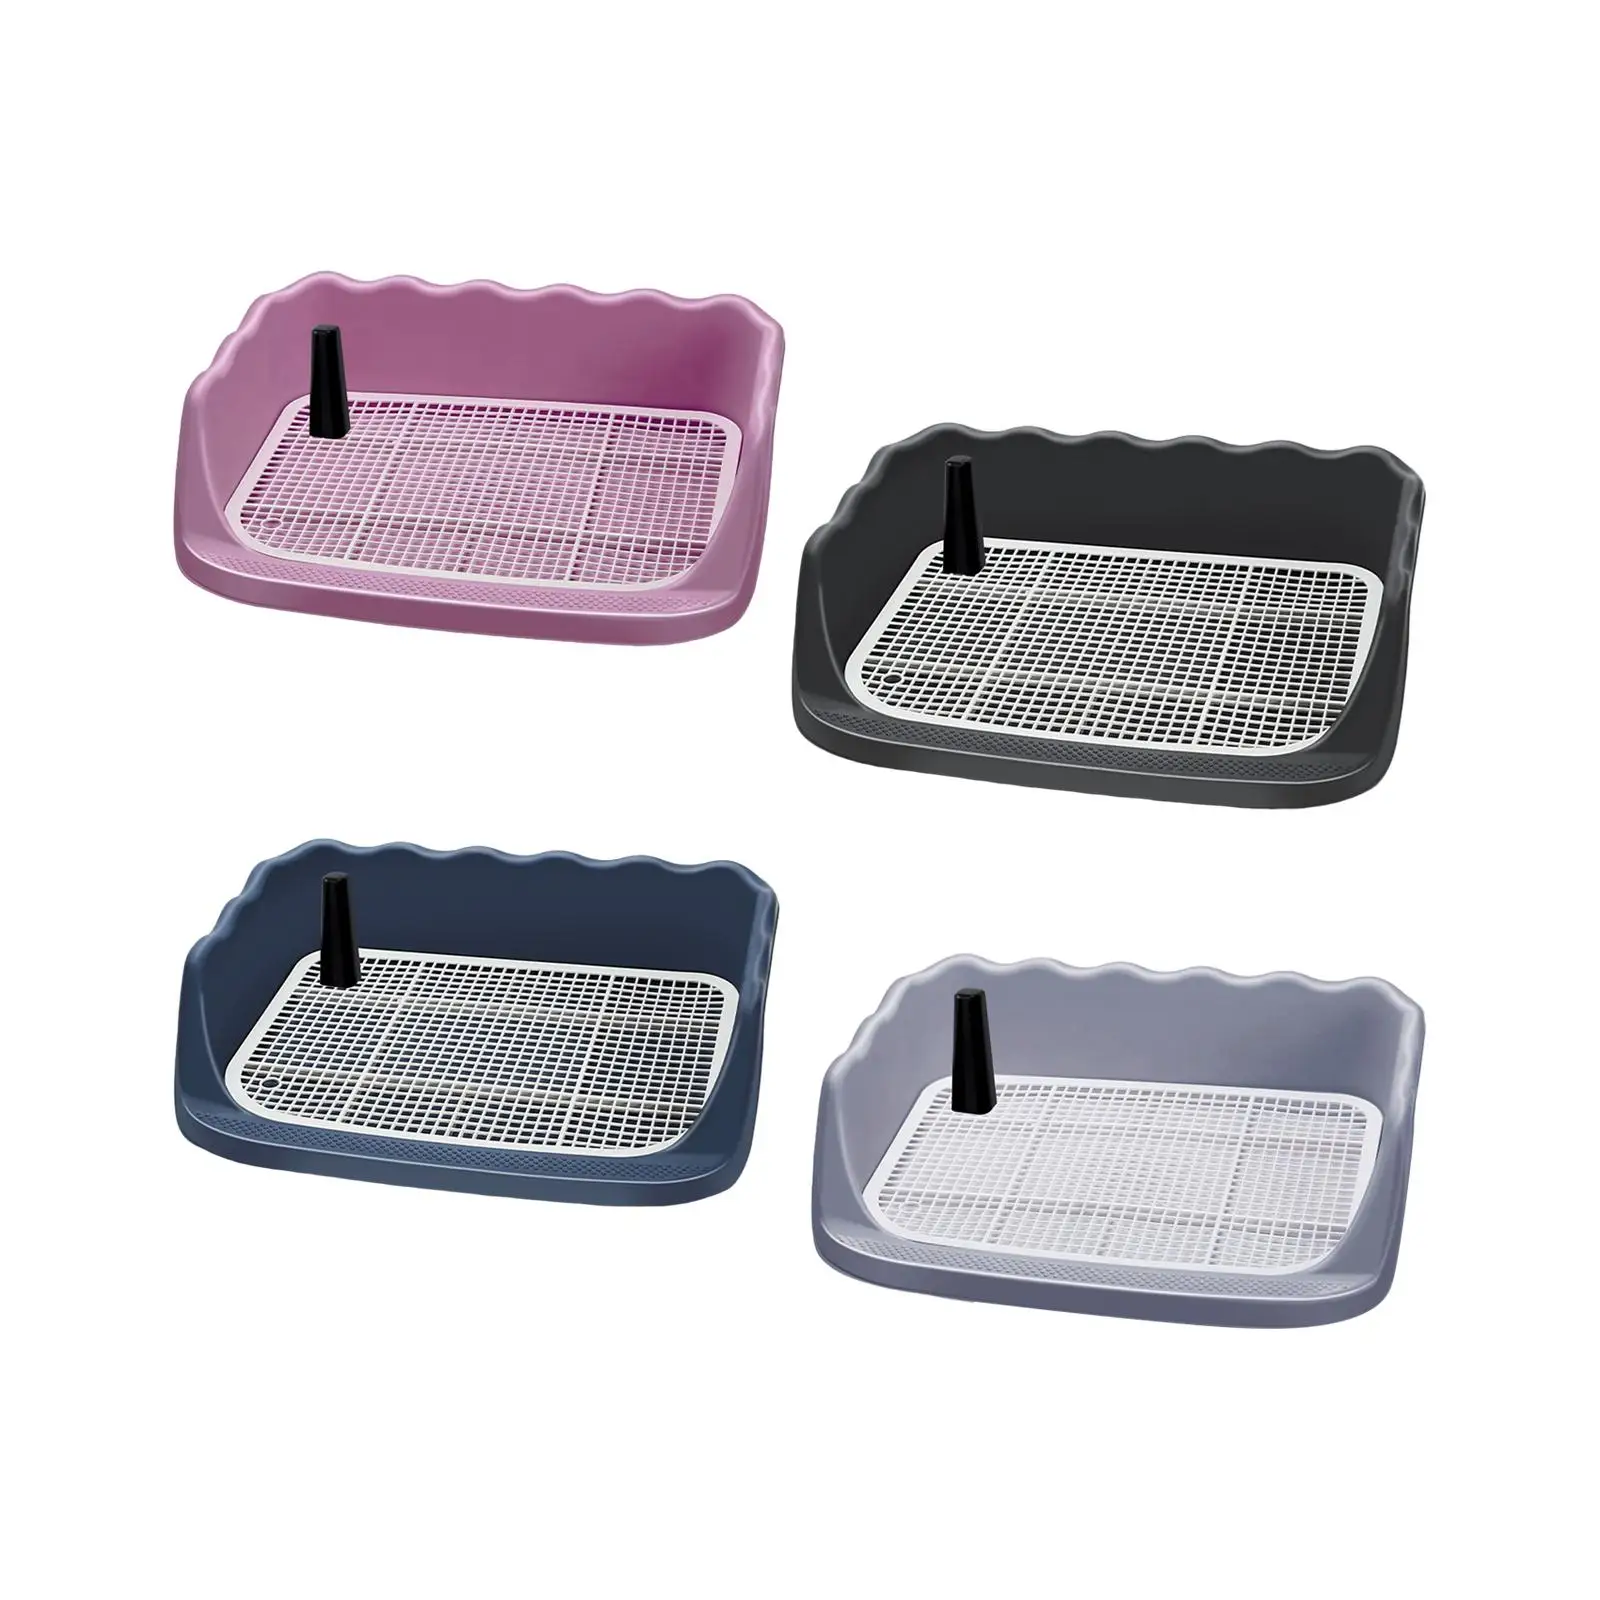 Dog Toilet Large Puppy Training Tray Indoor Dog Potty Tray Pee Pad Holder for Hamster Small Animals Bunny Small and Medium Dogs